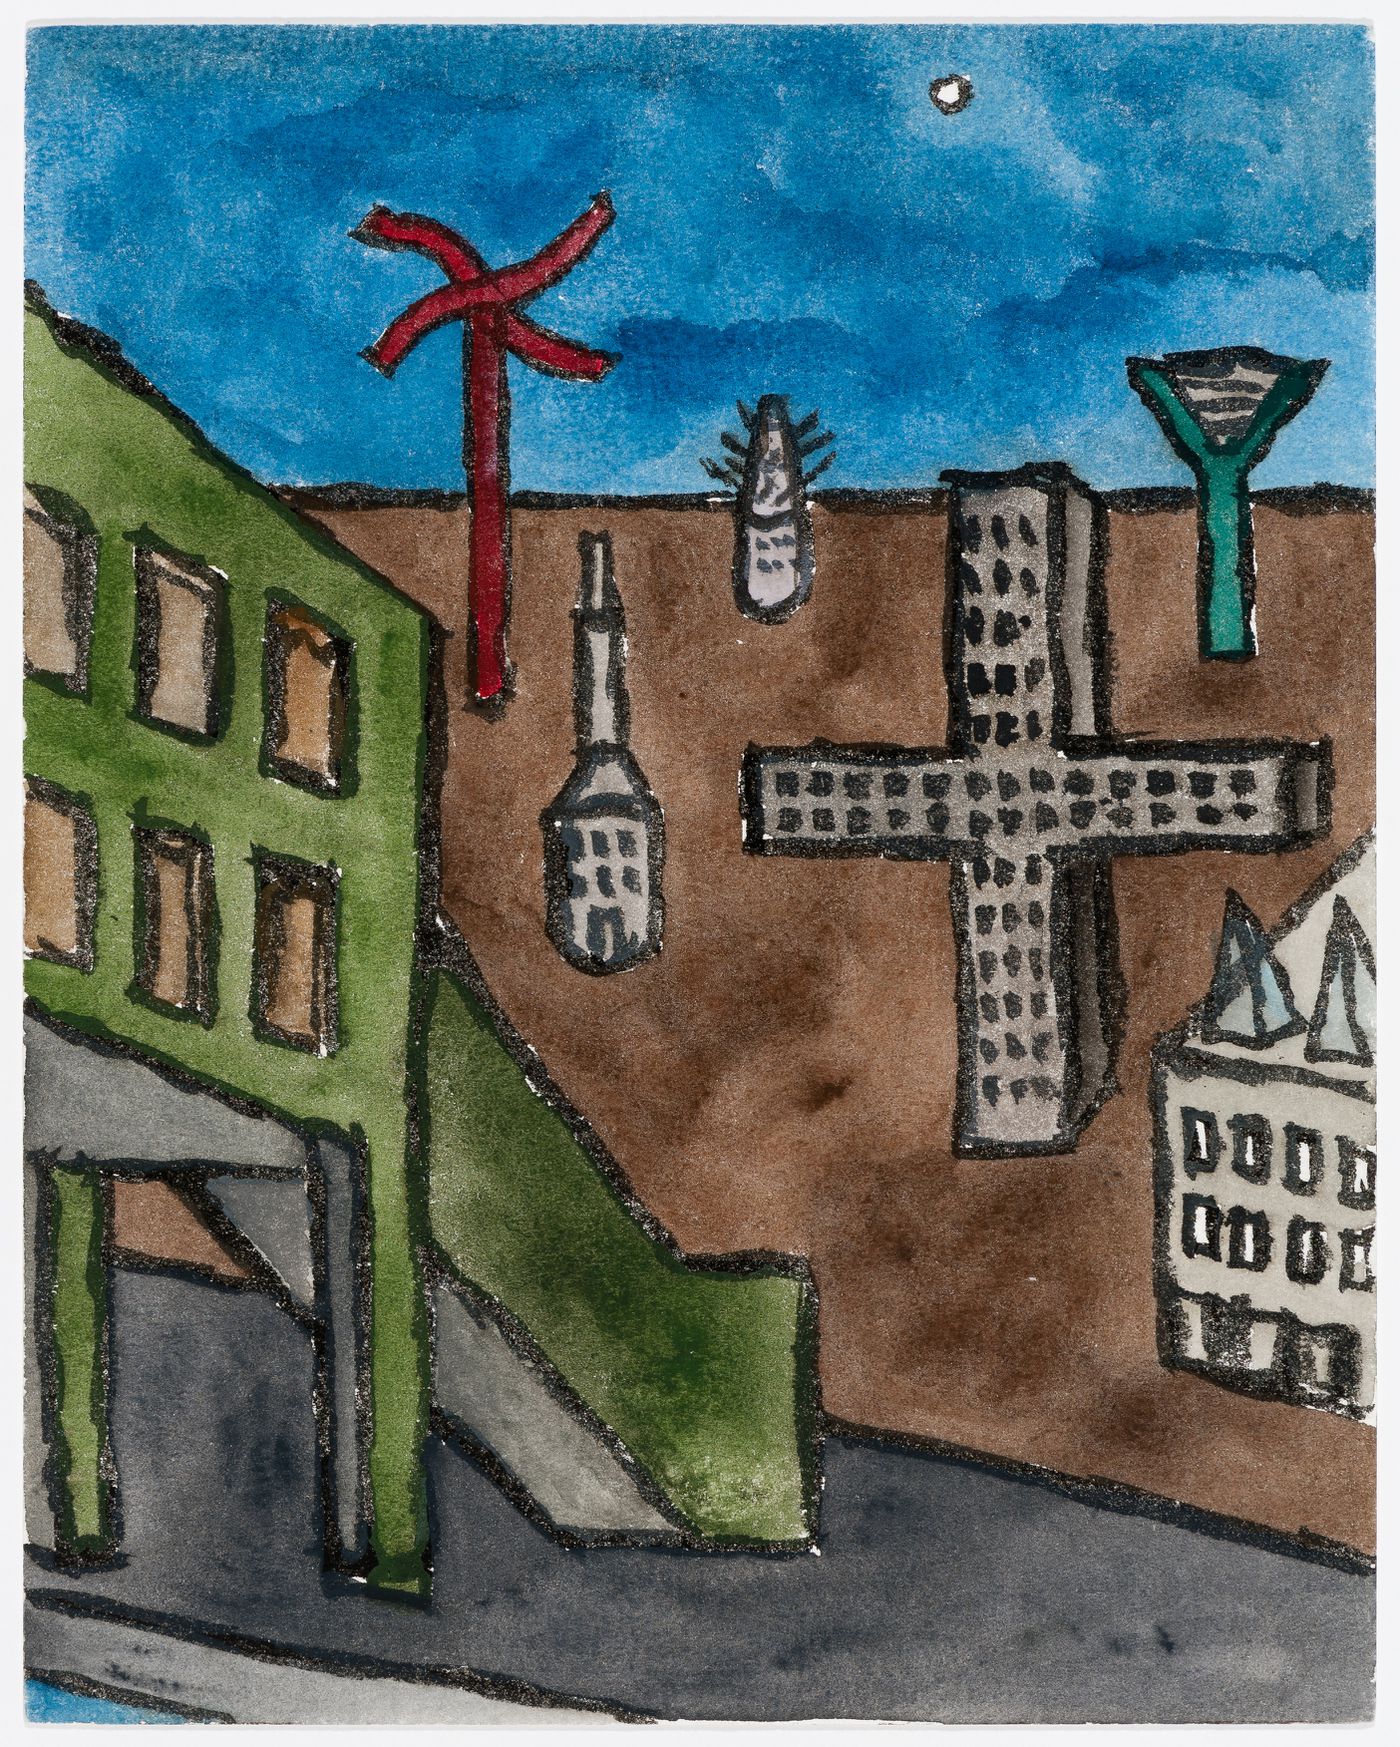 Painting for Berlin Night depicting Canal Bridge, End of Night Structure, Security Bureau, Astronomy Observatory, Building Department, Theater Studios, and Custom House